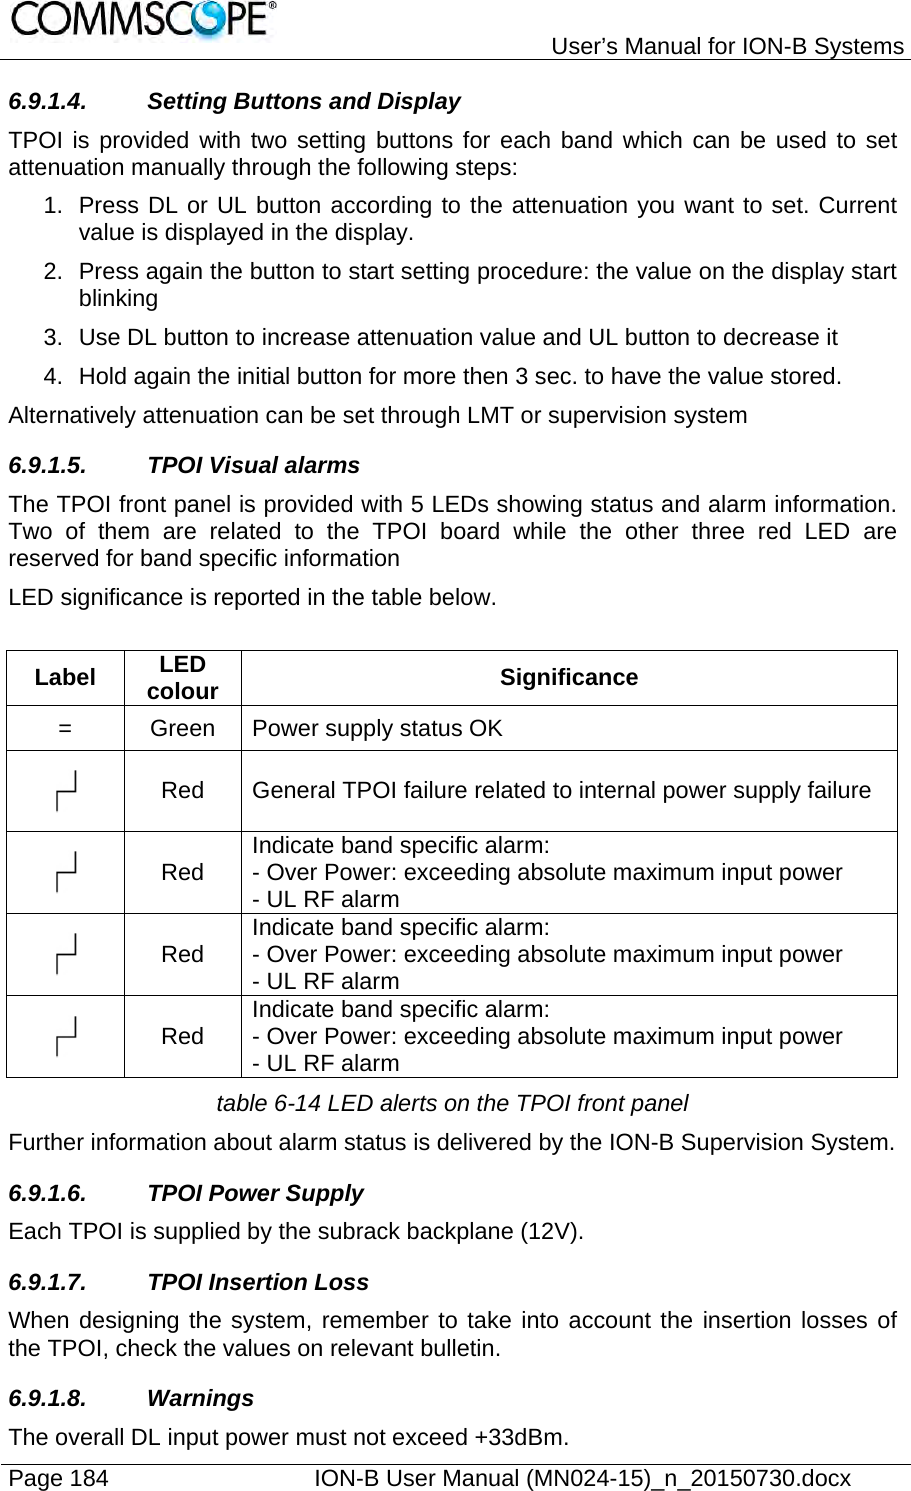   User’s Manual for ION-B Systems Page 184    ION-B User Manual (MN024-15)_n_20150730.docx  6.9.1.4.  Setting Buttons and Display TPOI is provided with two setting buttons for each band which can be used to set attenuation manually through the following steps: 1.  Press DL or UL button according to the attenuation you want to set. Current value is displayed in the display. 2.  Press again the button to start setting procedure: the value on the display start blinking 3.  Use DL button to increase attenuation value and UL button to decrease it 4.  Hold again the initial button for more then 3 sec. to have the value stored. Alternatively attenuation can be set through LMT or supervision system 6.9.1.5. TPOI Visual alarms  The TPOI front panel is provided with 5 LEDs showing status and alarm information. Two of them are related to the TPOI board while the other three red LED are reserved for band specific information LED significance is reported in the table below.  Label  LED colour  Significance =  Green  Power supply status OK  Red  General TPOI failure related to internal power supply failure  Red  Indicate band specific alarm: - Over Power: exceeding absolute maximum input power - UL RF alarm  Red  Indicate band specific alarm: - Over Power: exceeding absolute maximum input power - UL RF alarm  Red  Indicate band specific alarm: - Over Power: exceeding absolute maximum input power - UL RF alarm table 6-14 LED alerts on the TPOI front panel Further information about alarm status is delivered by the ION-B Supervision System. 6.9.1.6.  TPOI Power Supply  Each TPOI is supplied by the subrack backplane (12V). 6.9.1.7.  TPOI Insertion Loss  When designing the system, remember to take into account the insertion losses of the TPOI, check the values on relevant bulletin. 6.9.1.8. Warnings The overall DL input power must not exceed +33dBm.  